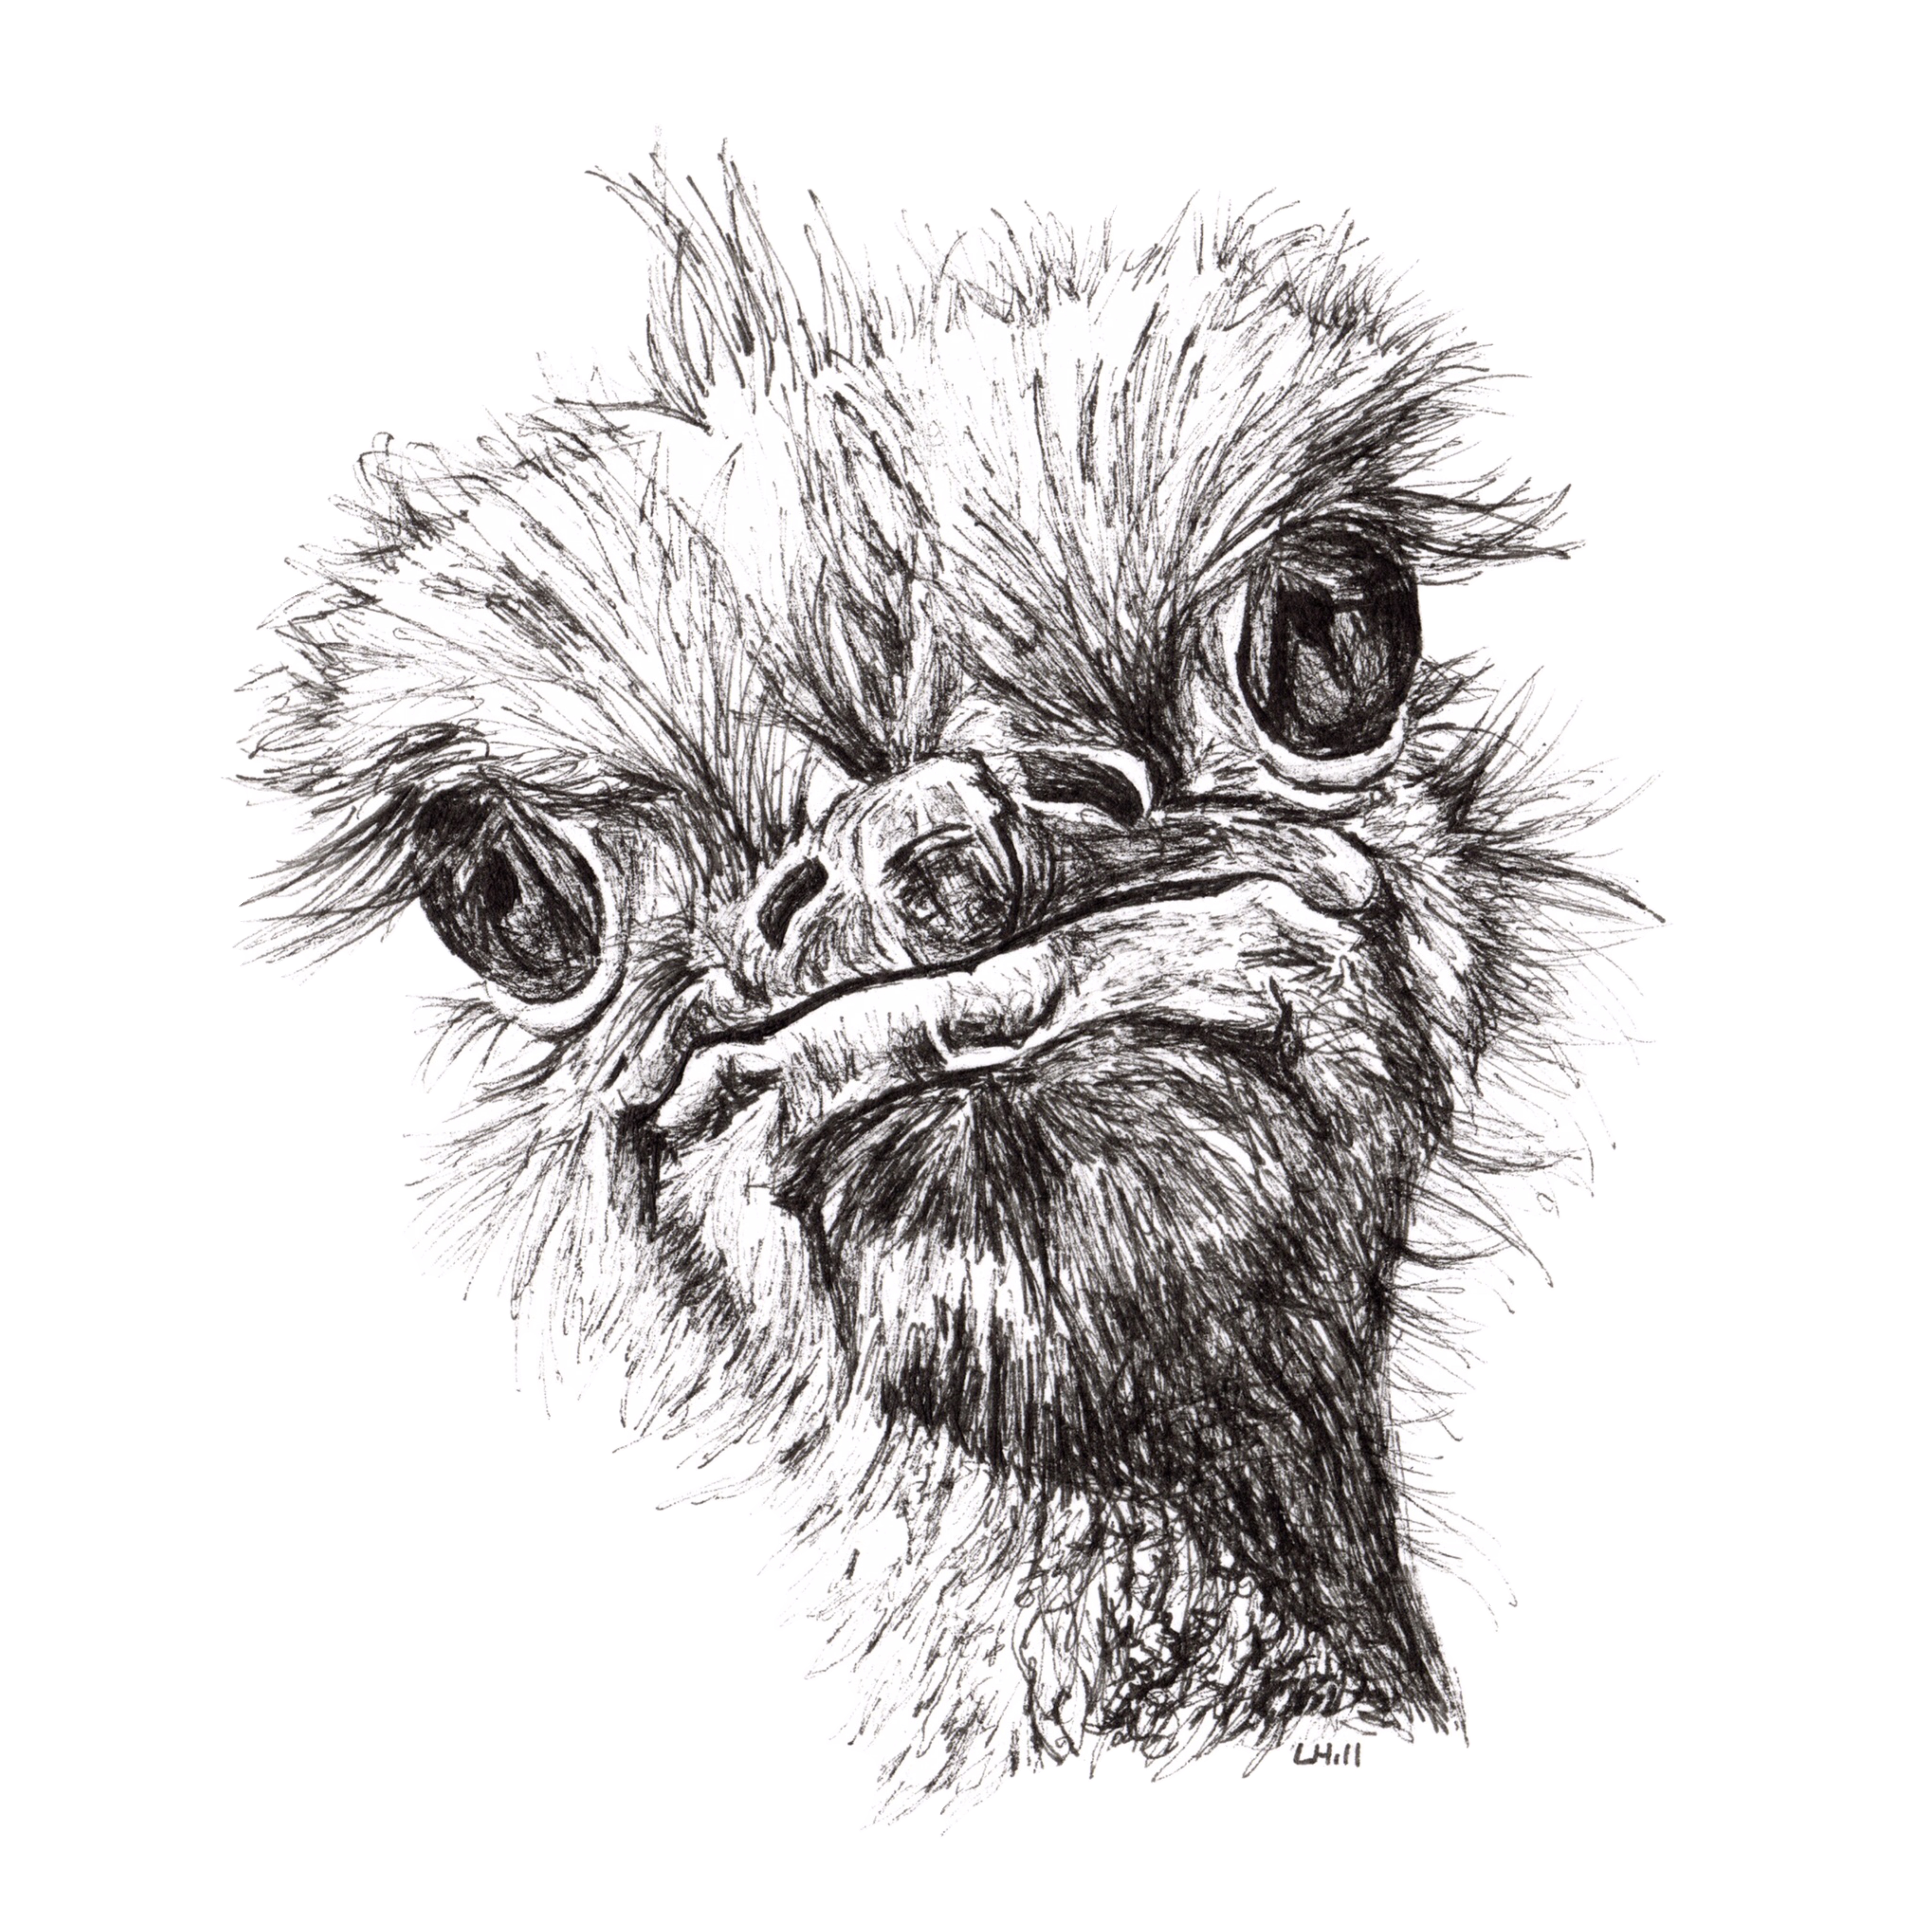 Ostrich pen and ink illustration by Louisa Hill